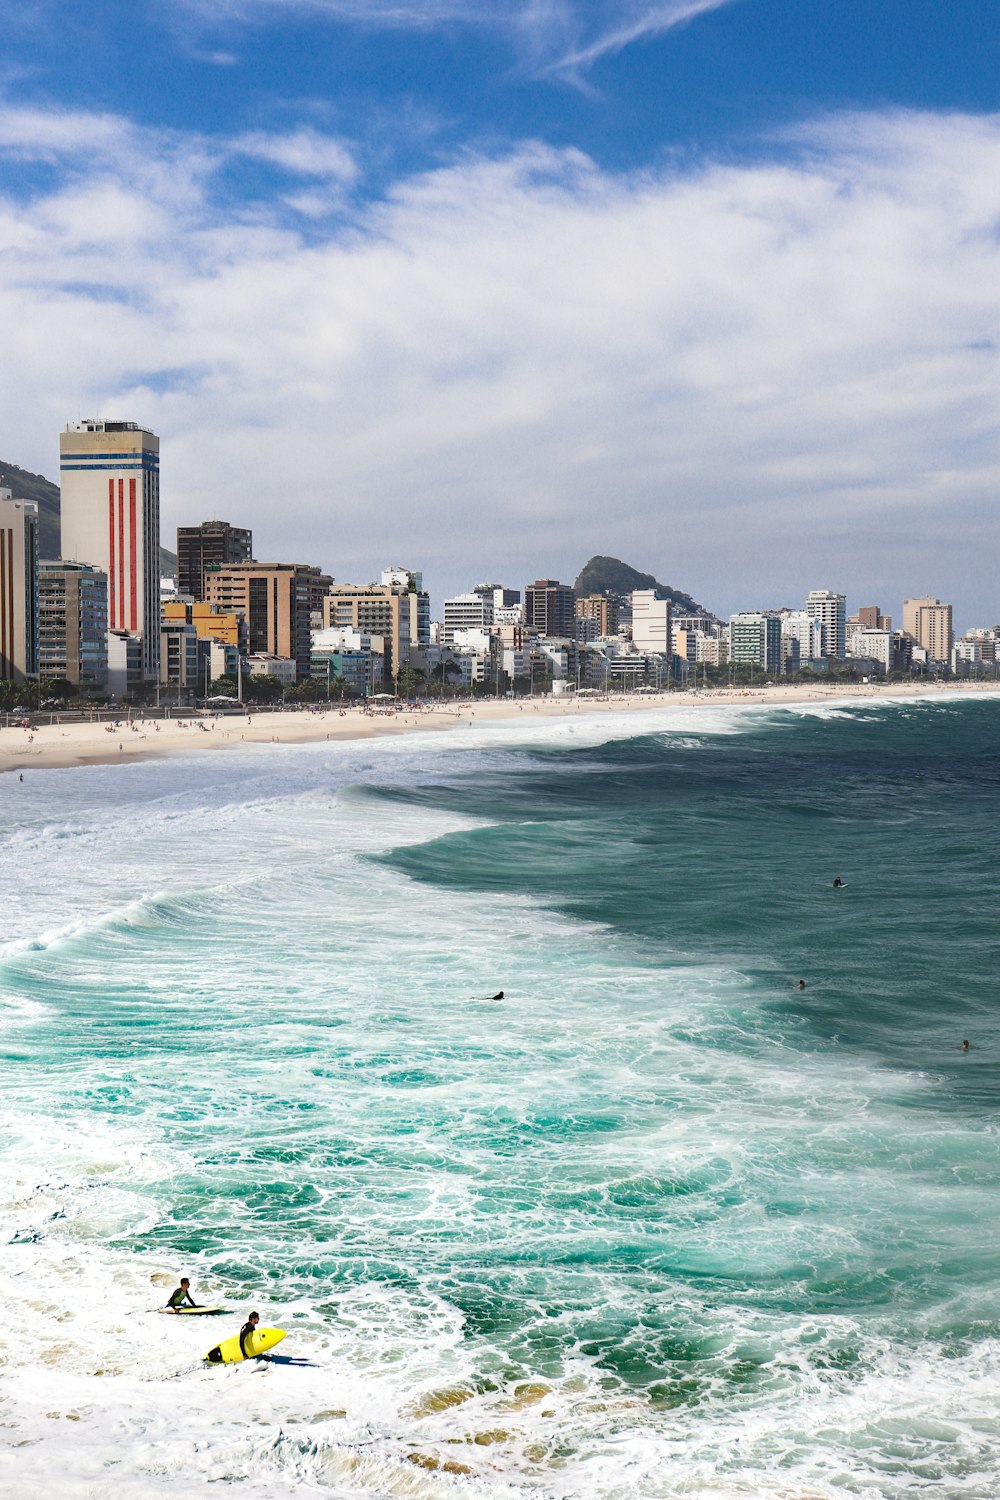 surfers in the ocean with a city in the background